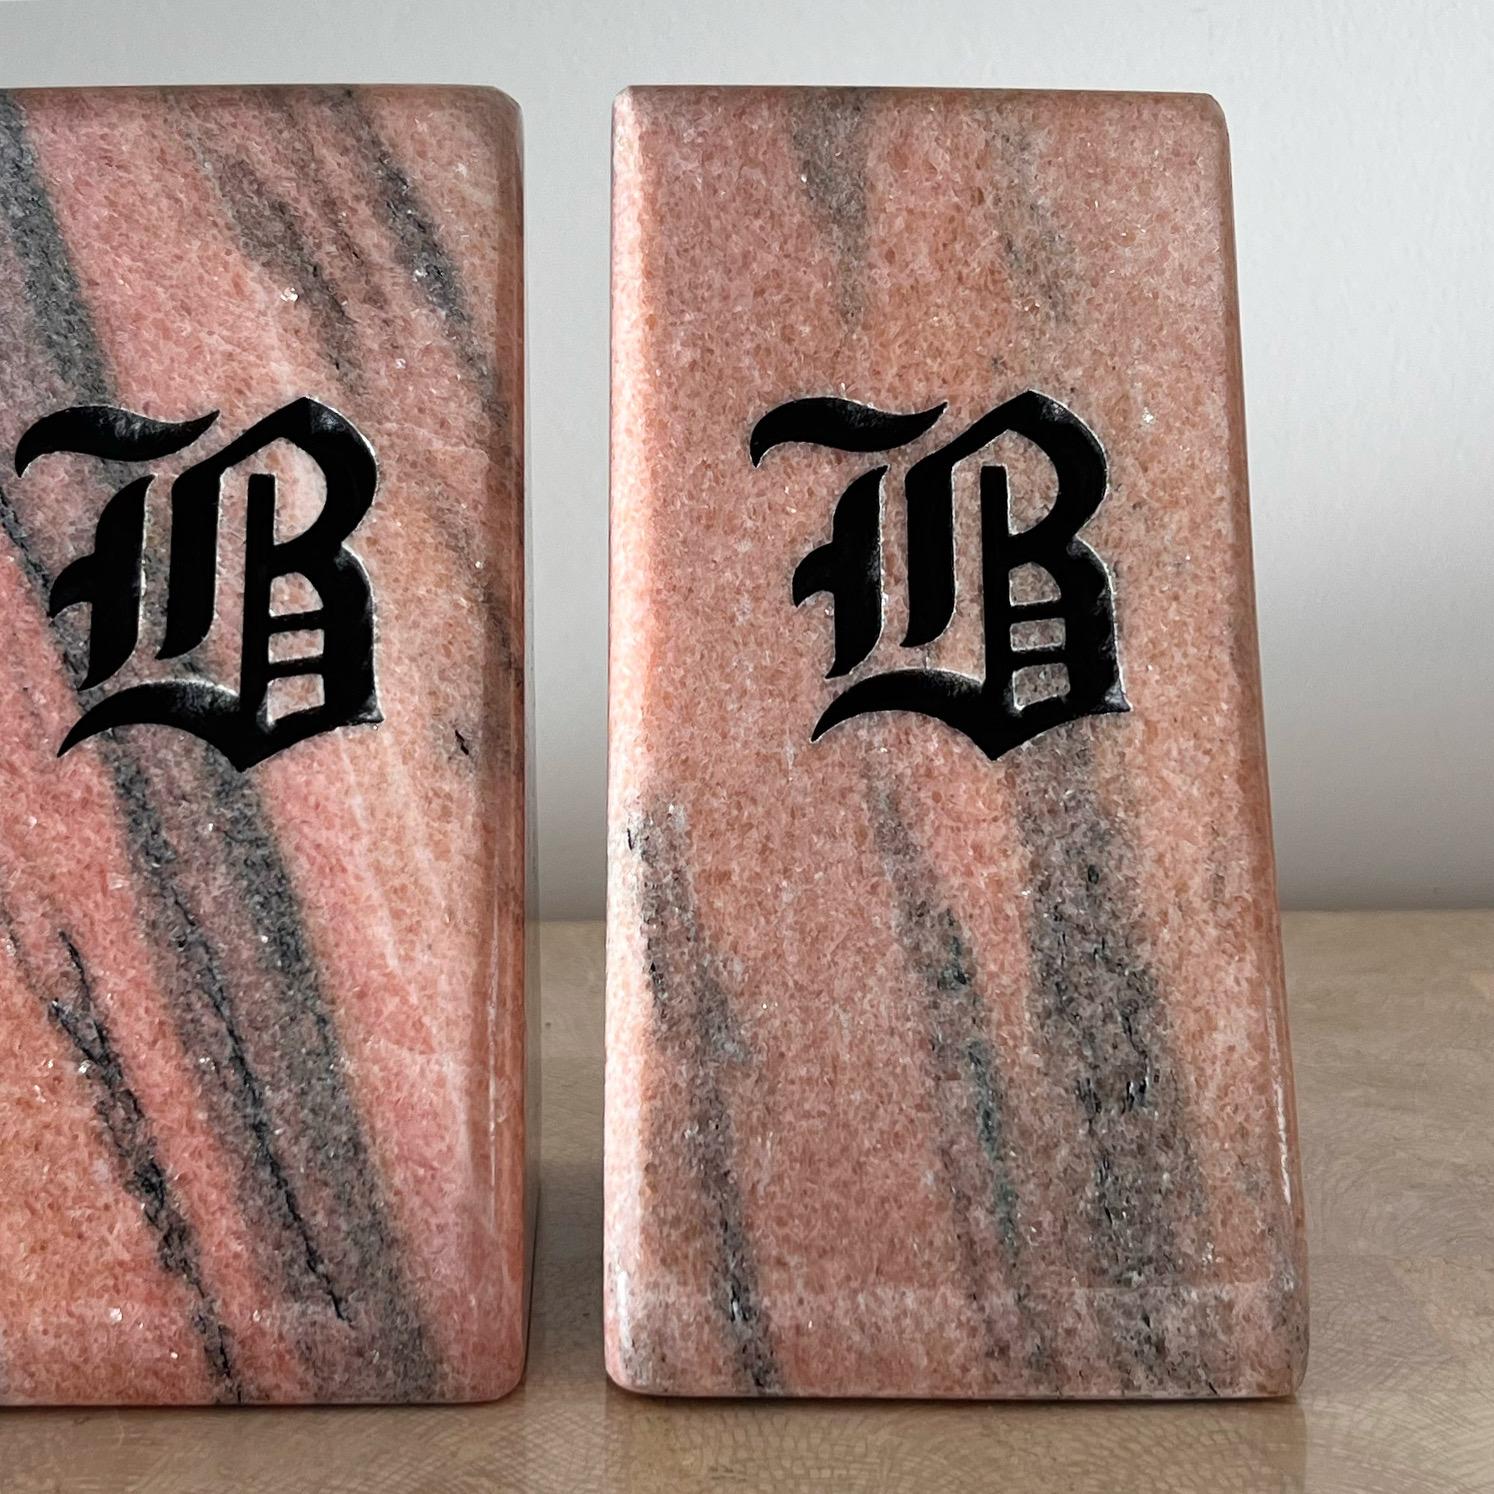 A very unique pair of monumental bookends in triangular chunks of pink marble, late 20th century. Each has the initial “B” in Gothic lettering carved into the back and painted black. A special item for anyone who feels some significance towards the